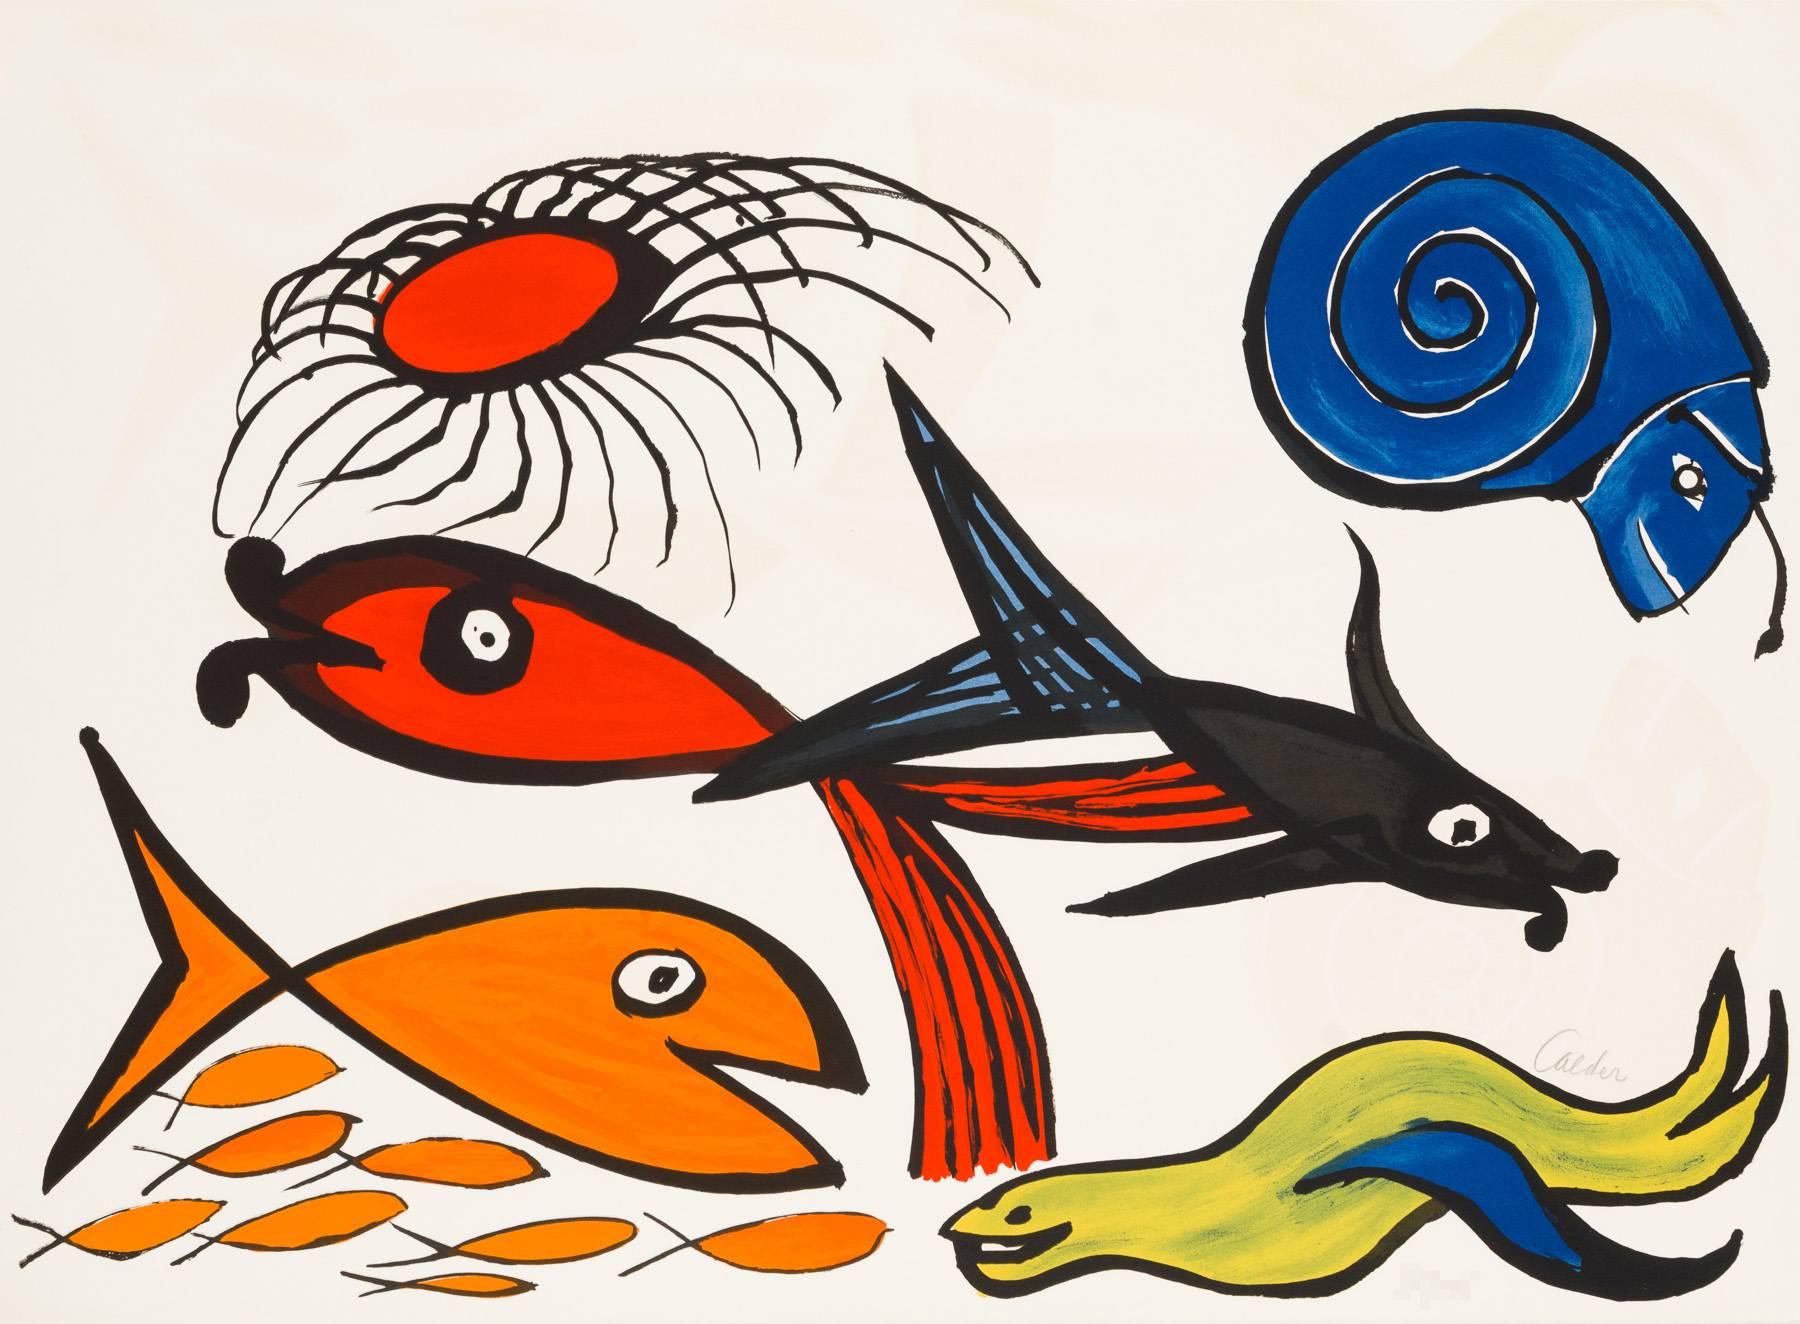 Untitled from Our Unfinished Revolution - Print by Alexander Calder